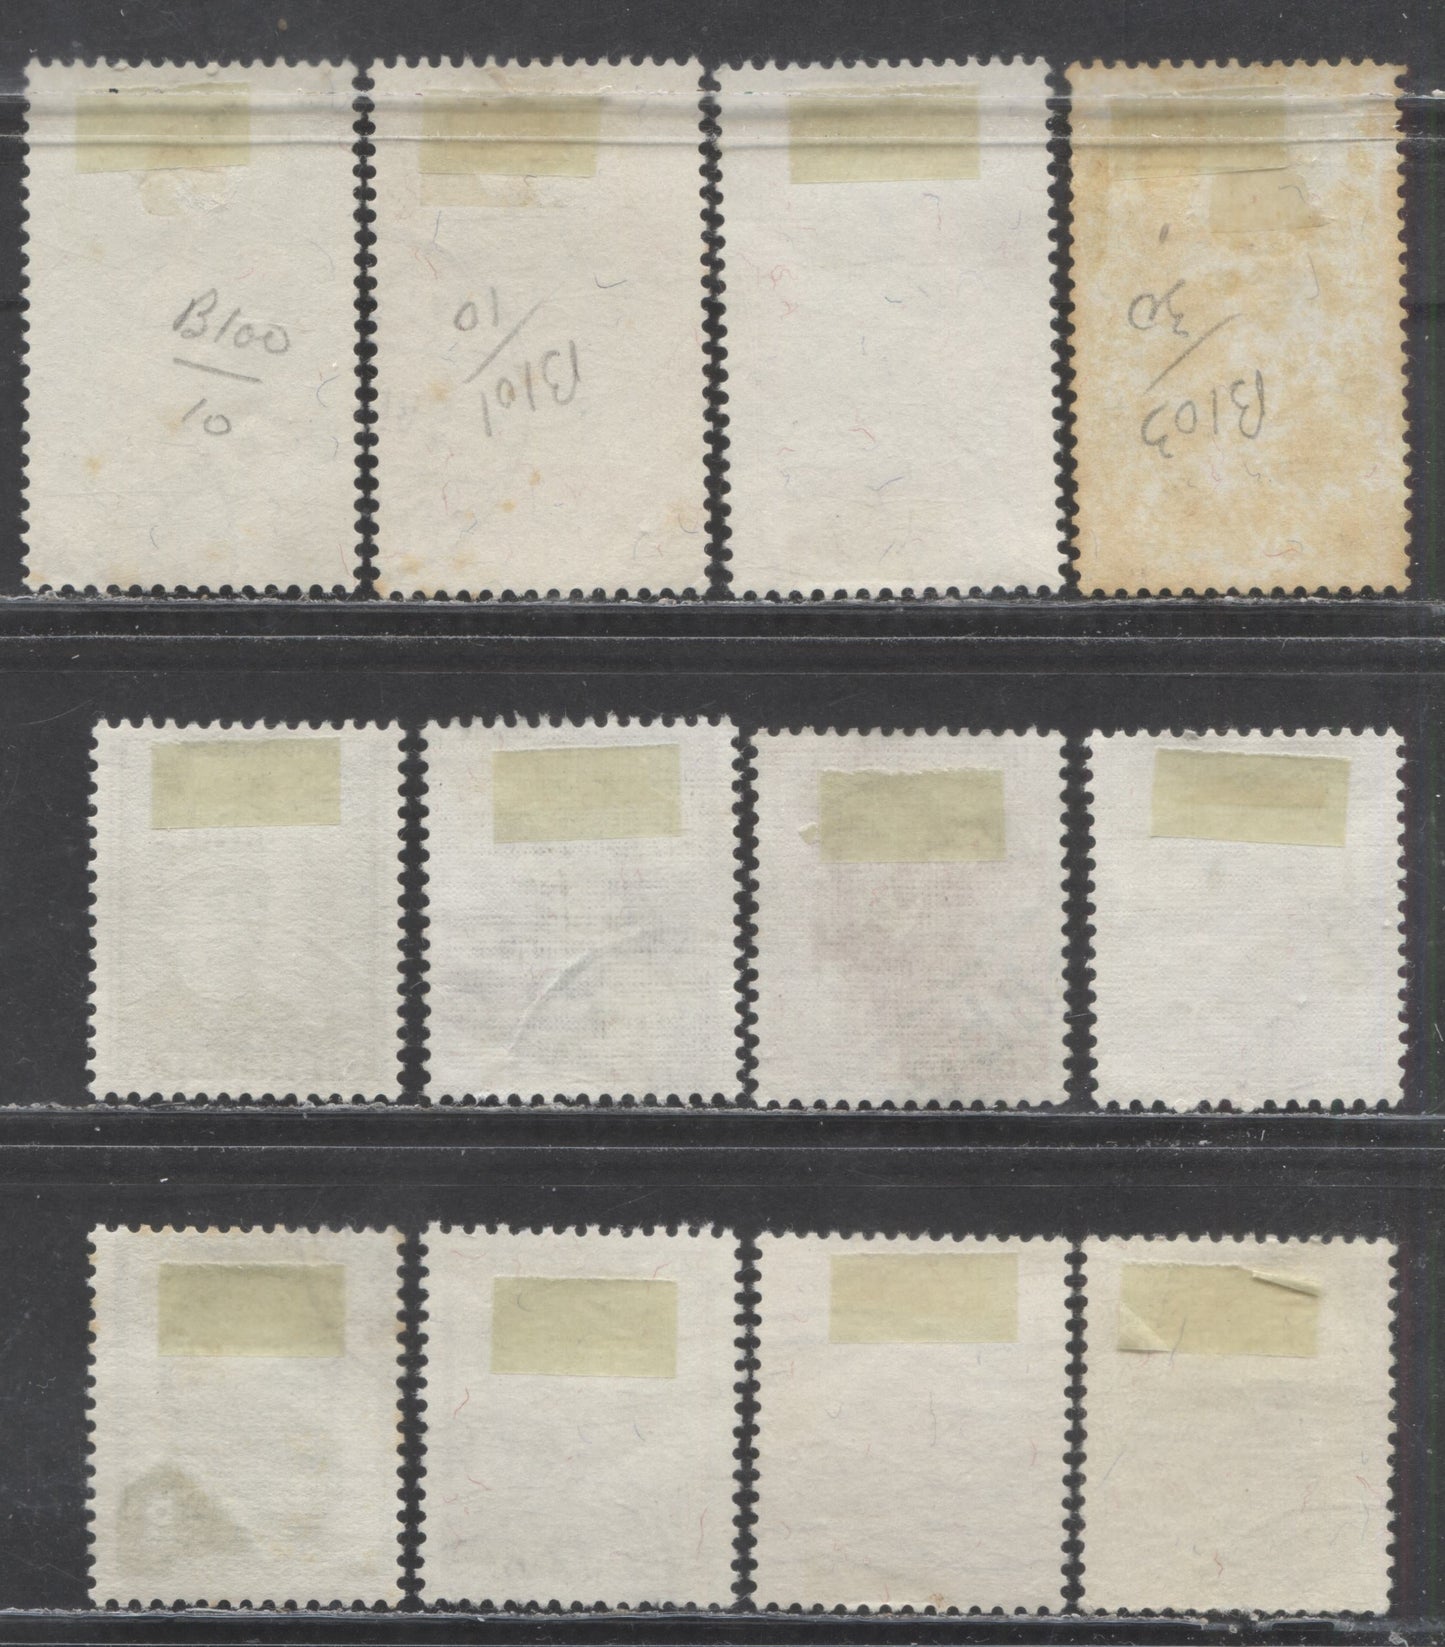 Lot 313 Switzerland SC#B96/B109 1939-1940 Semi Postals, 12 Fine/Very Fine Used Singles, Click on Listing to See ALL Pictures, 2022 Scott Classic Cat. $44.3 USD